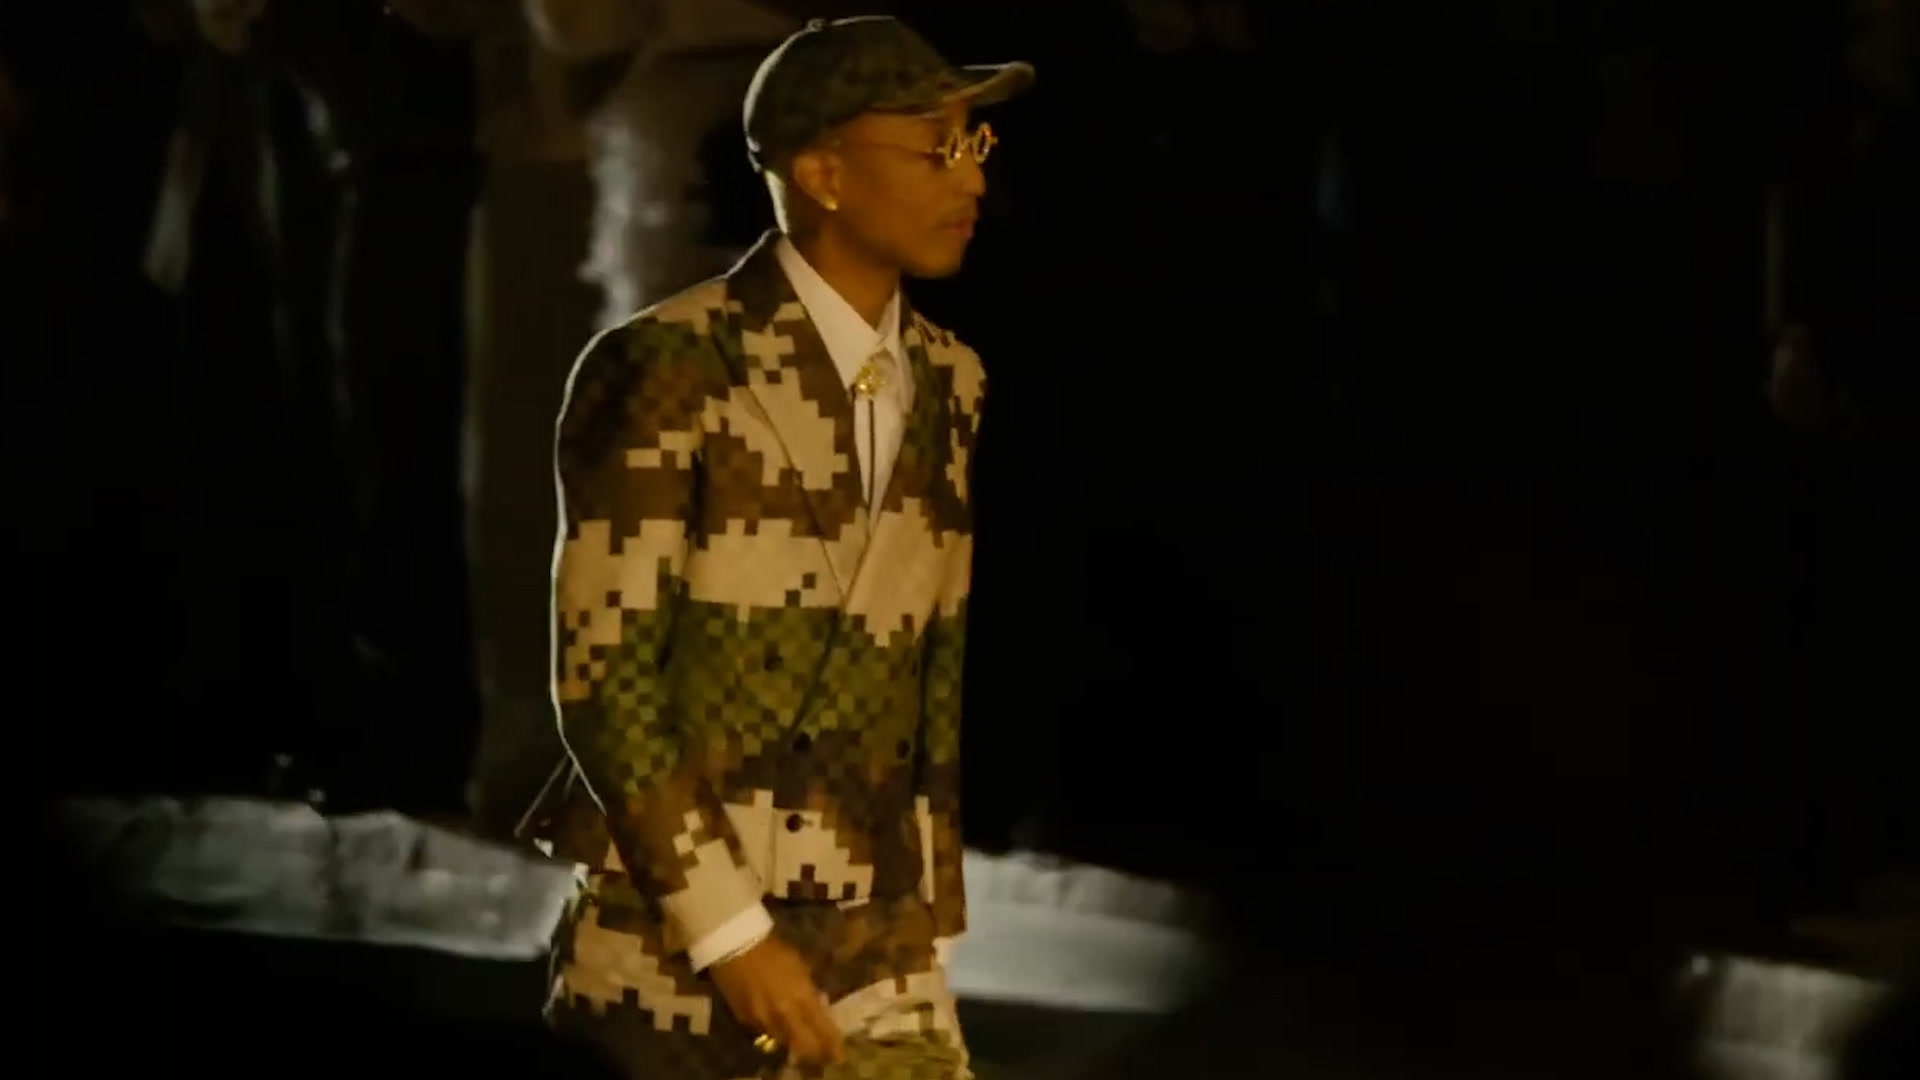 Pharrell's First Louis Vuitton Collection Is Phinally Here